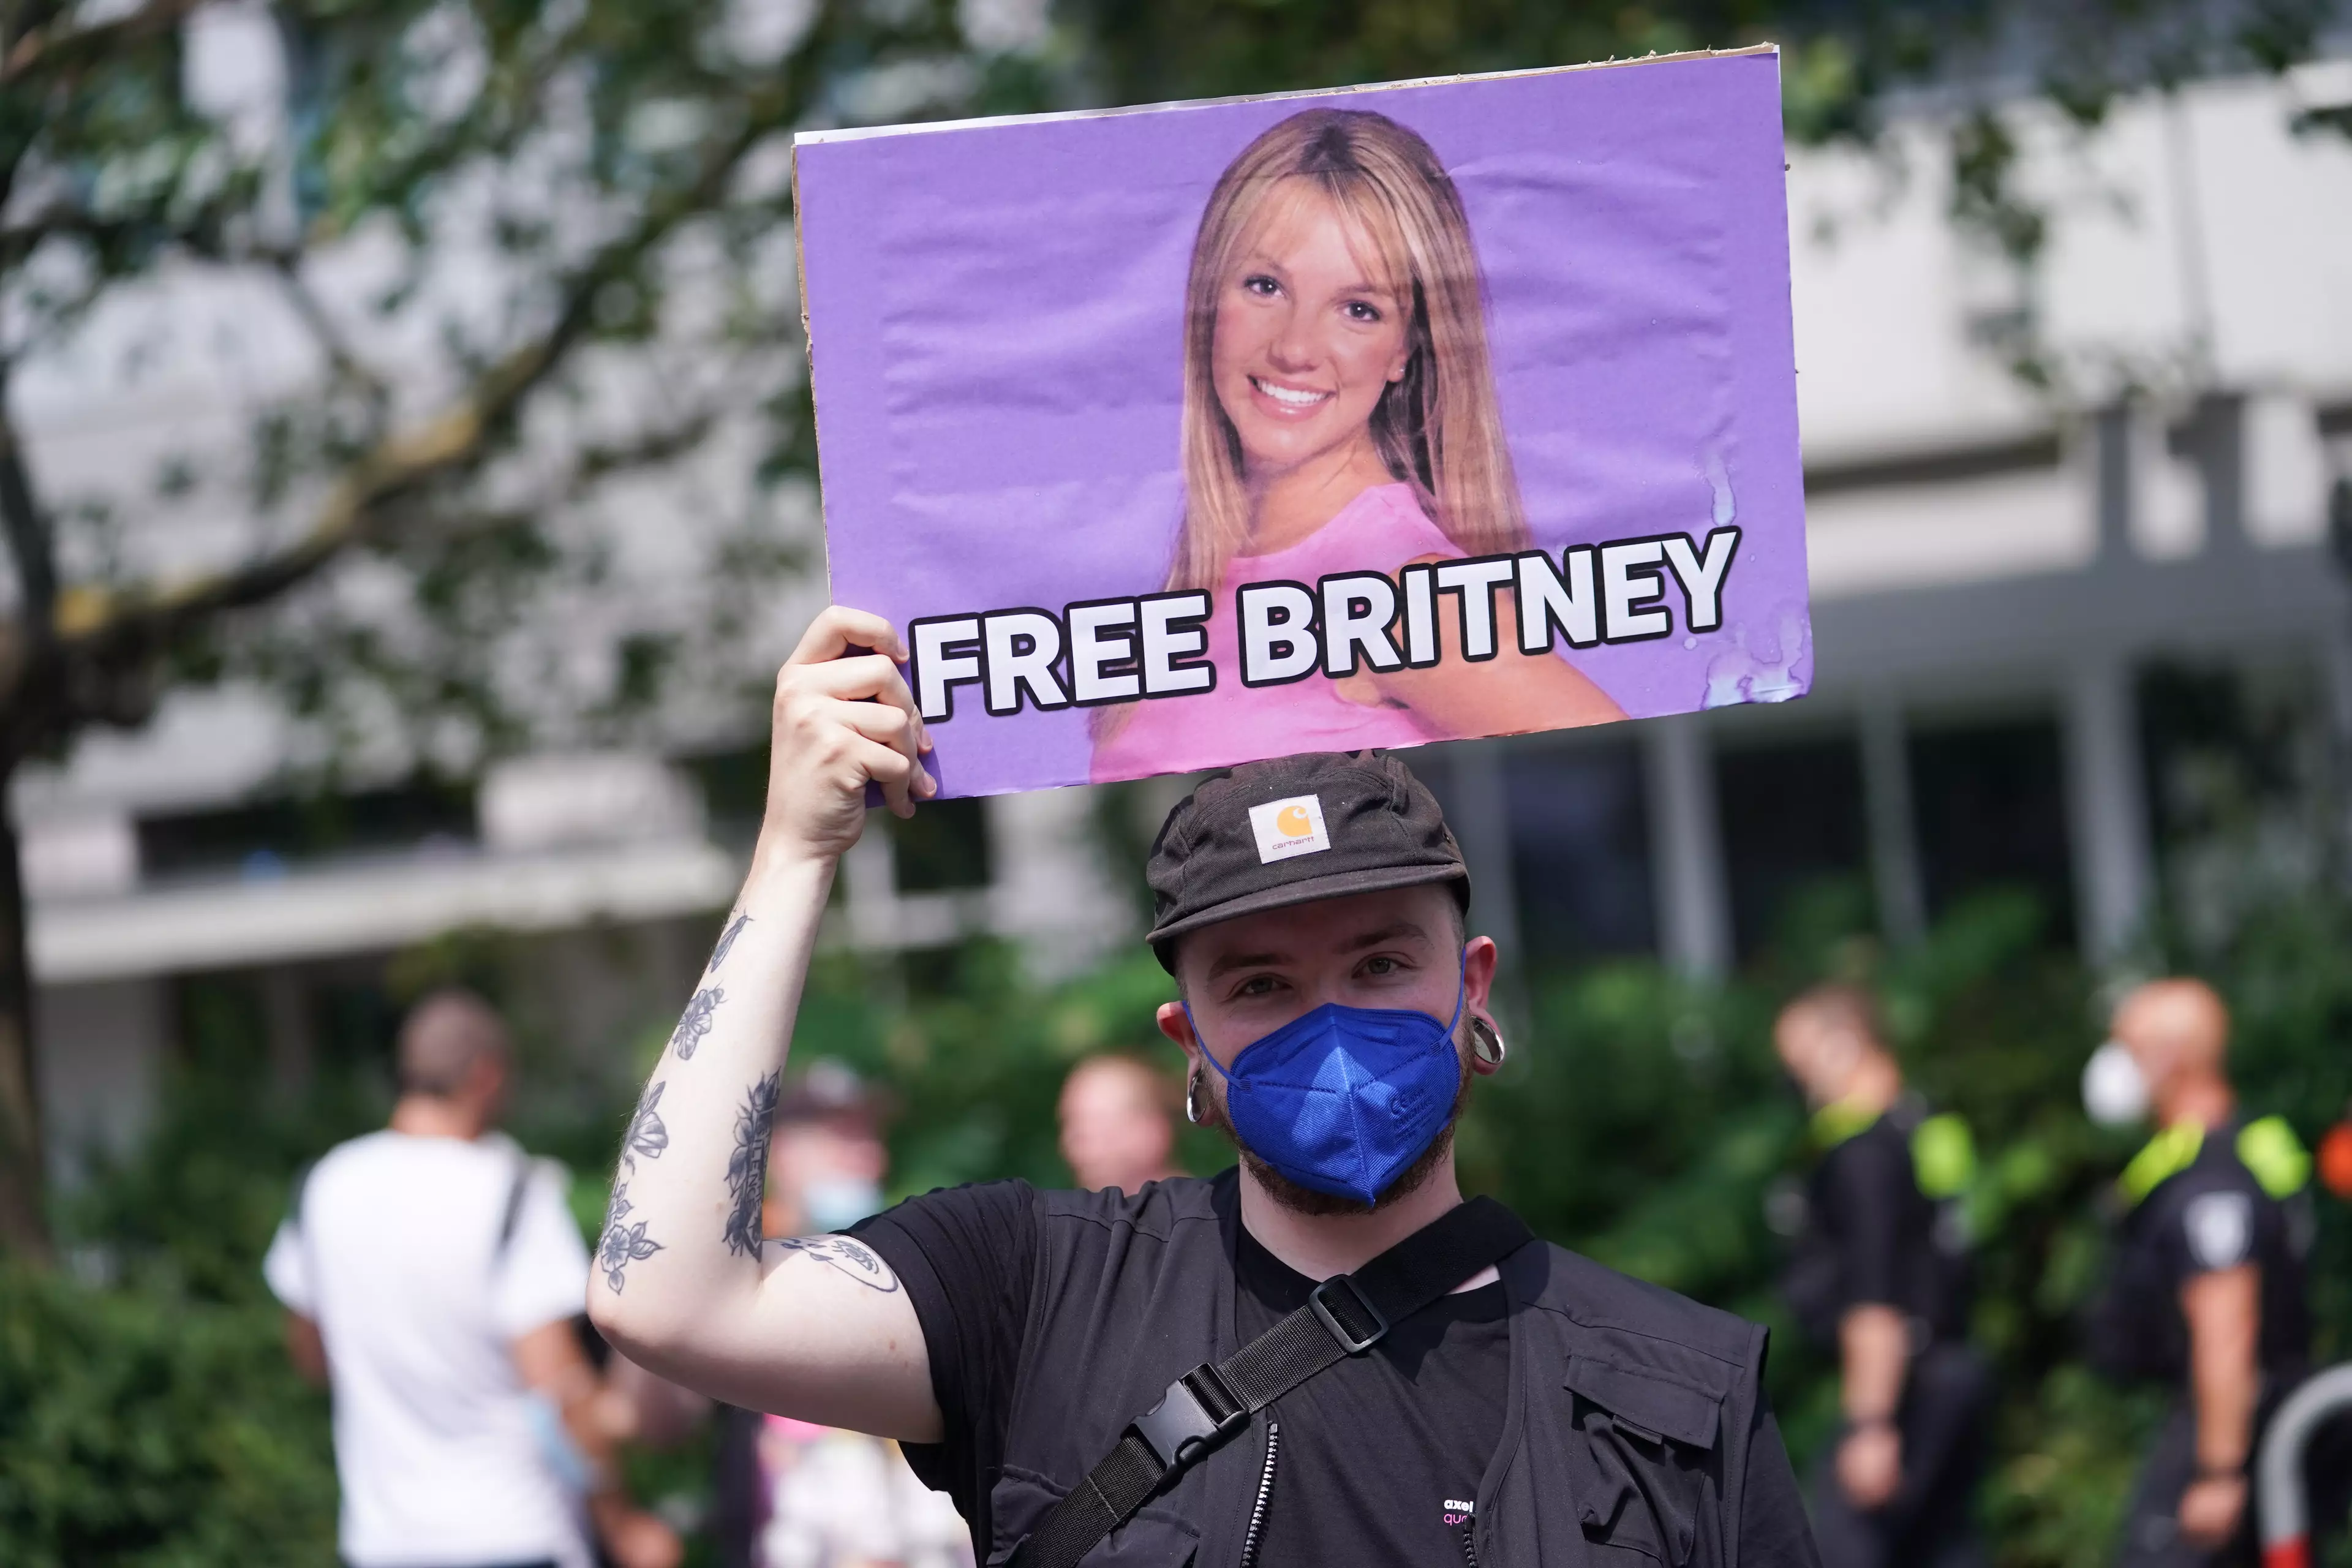 Fans have campaigned on behalf of Spears.